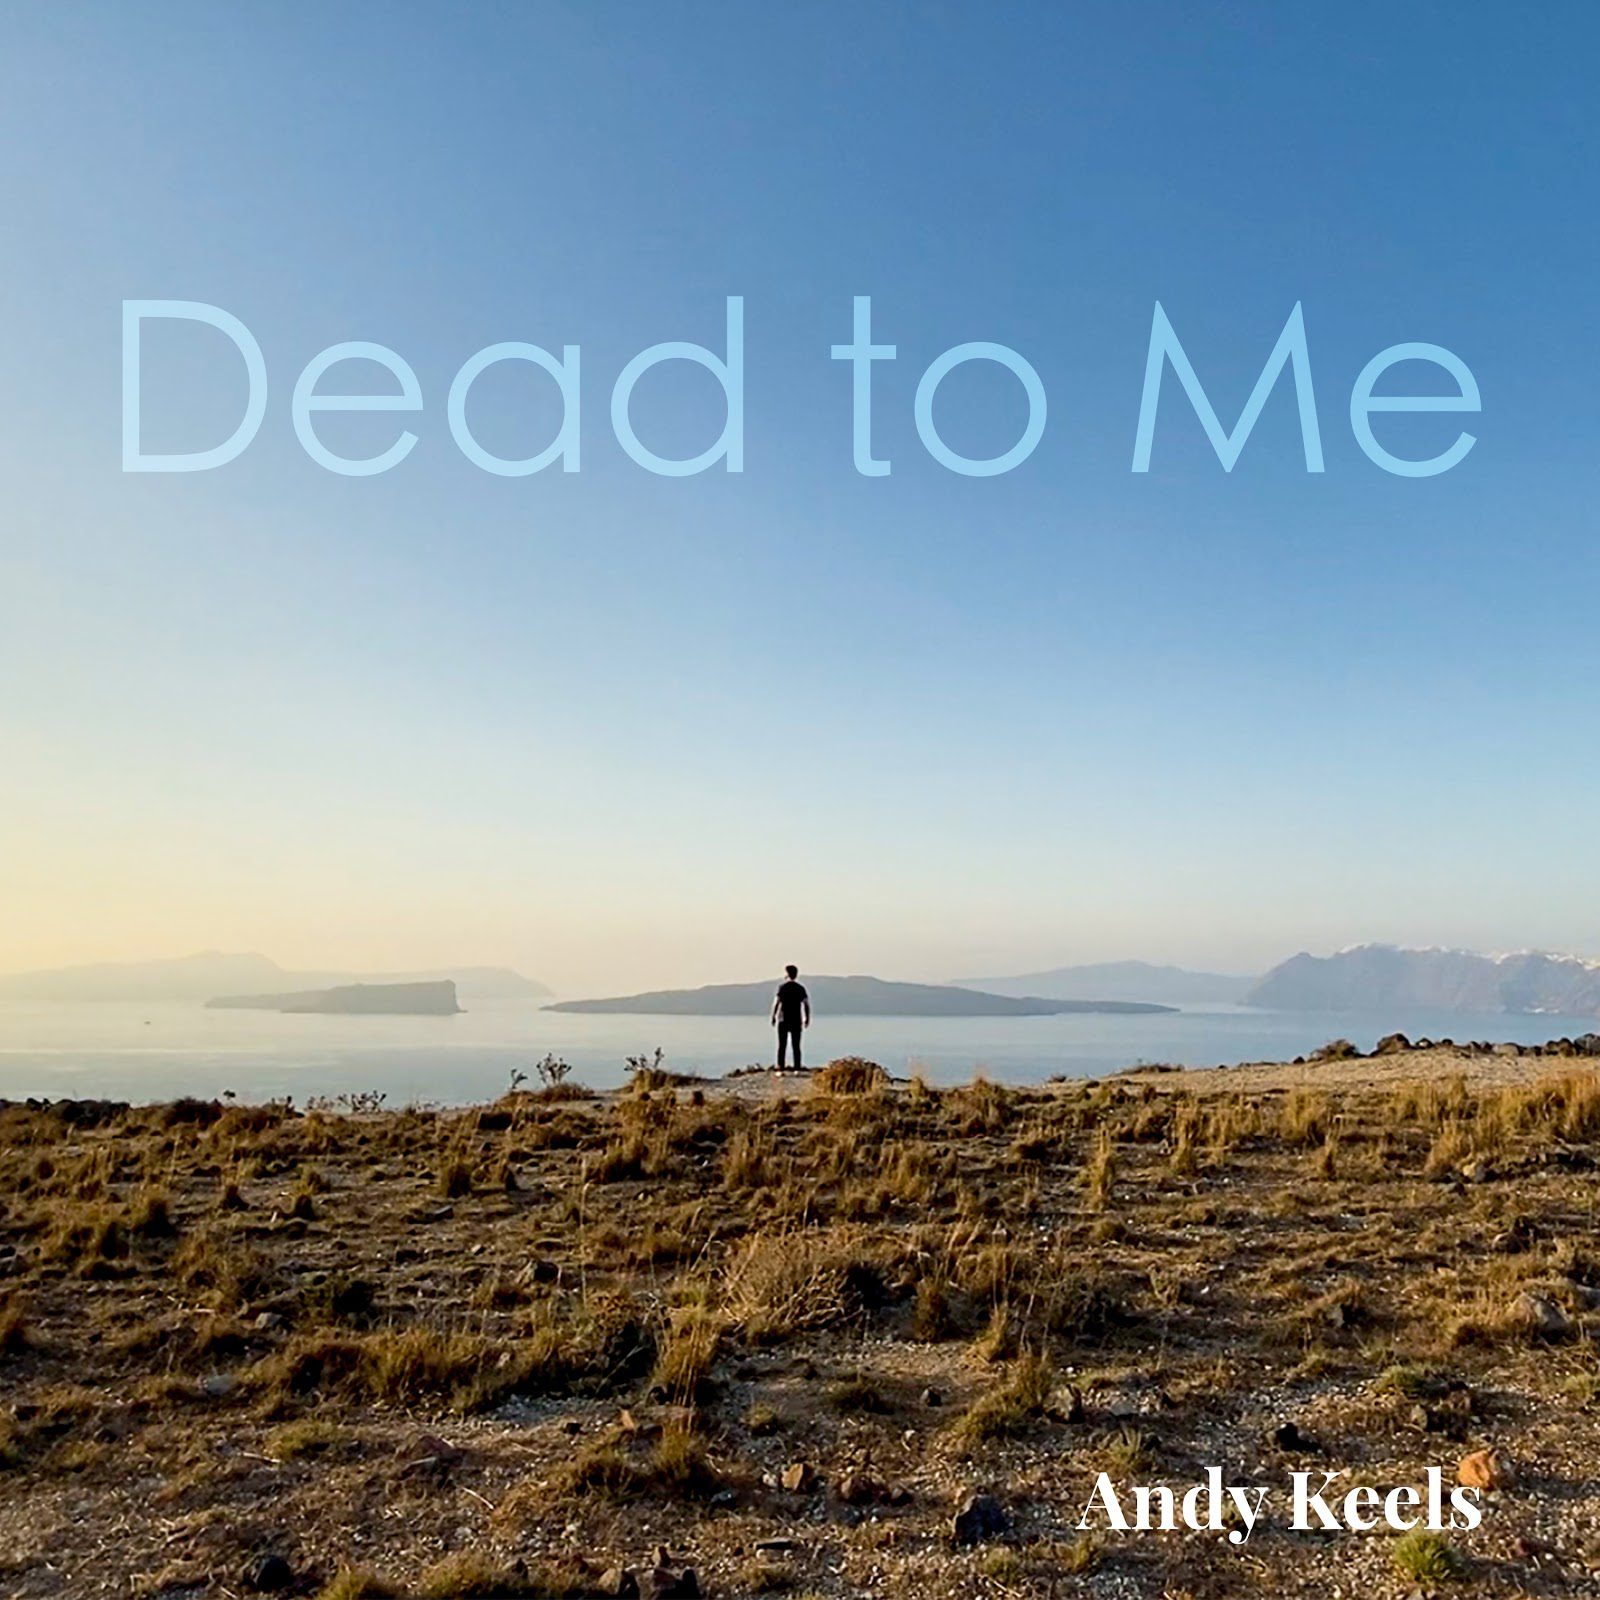 An Unyielding Masterpiece By Andy Keels – “Dead To Me”